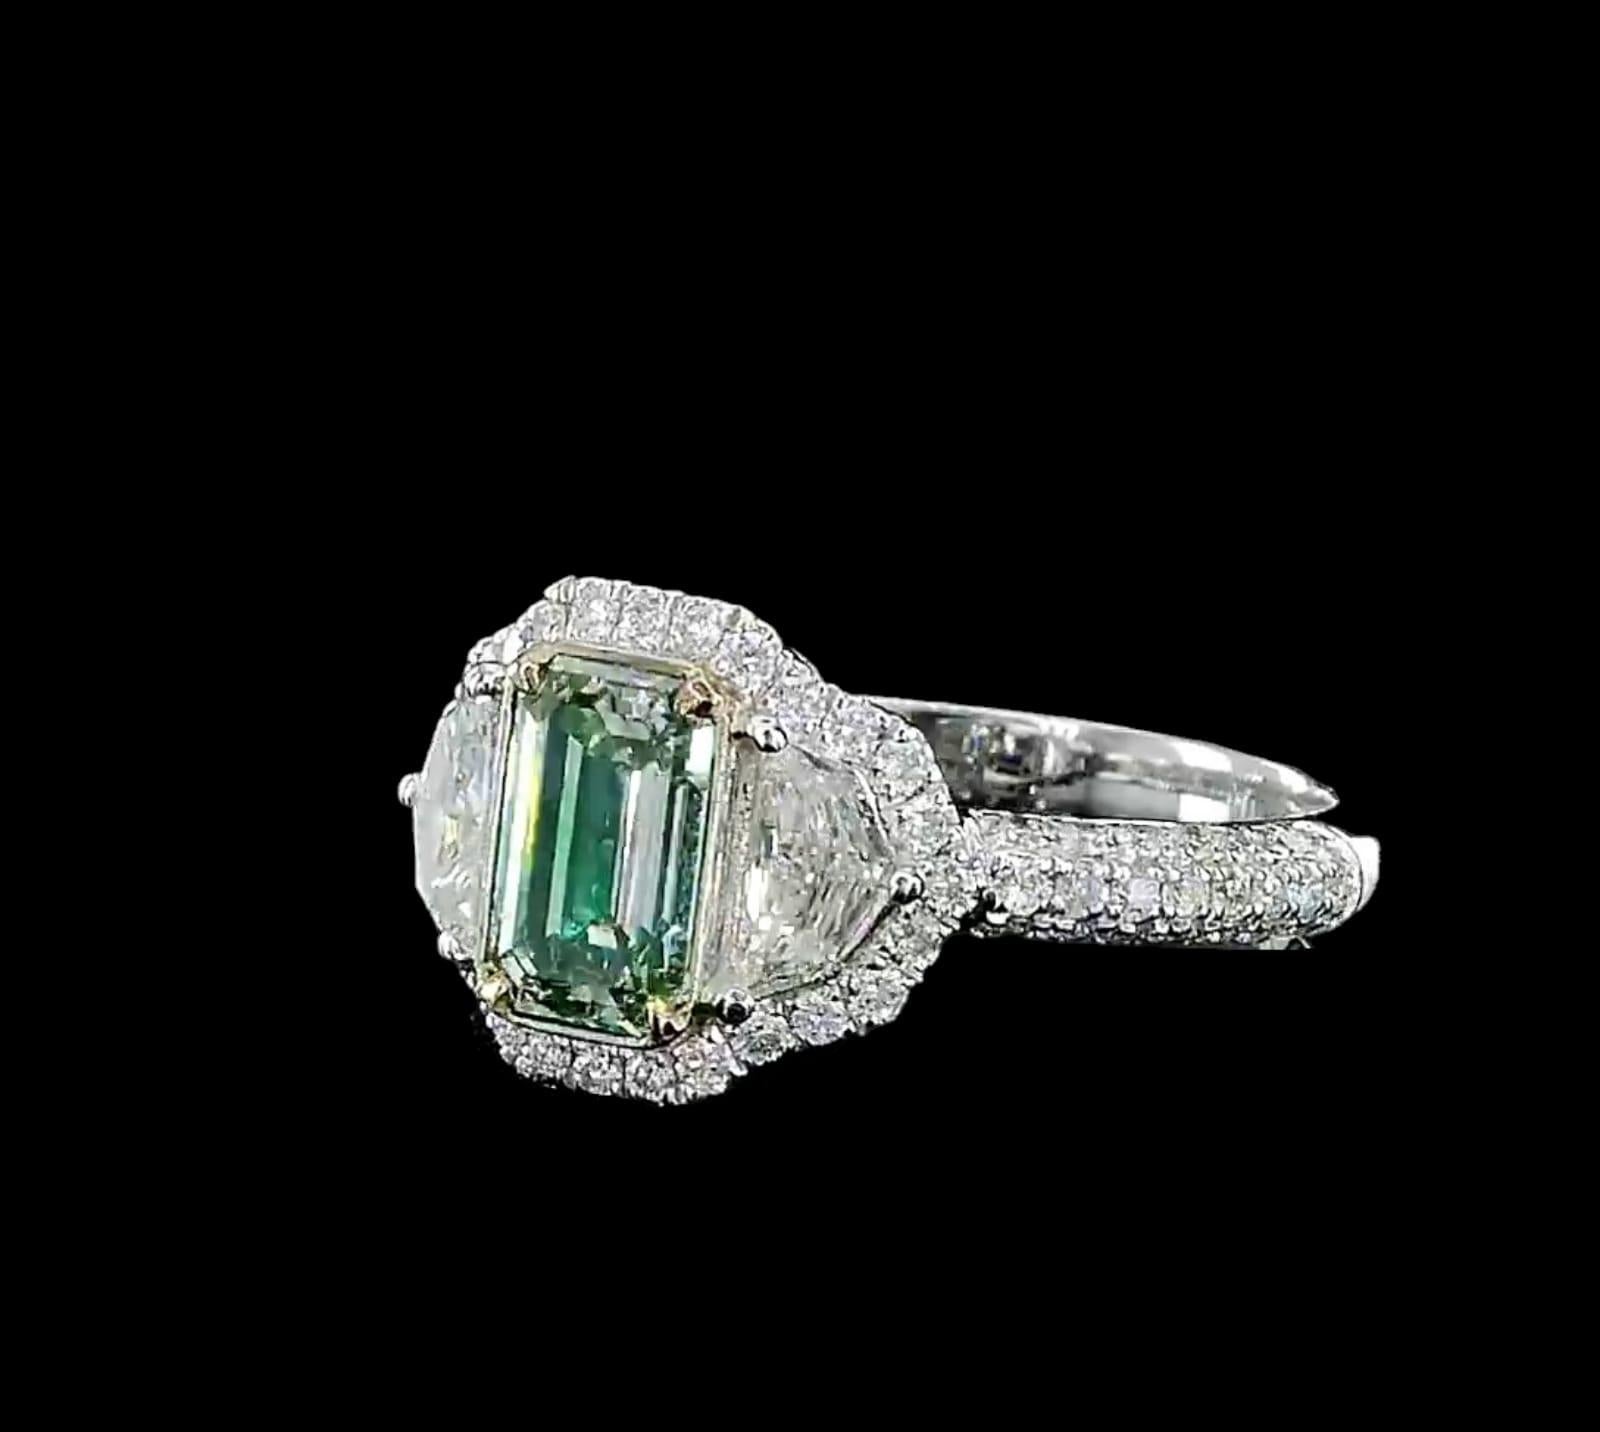 **100% NATURAL FANCY COLOUR DIAMOND JEWELRY**

✪ Jewelry Details ✪

♦ MAIN STONE DETAILS

➛ Stone Shape: Emerald
➛ Stone Color: Fancy Green
➛ Stone Clarity: VS
➛ Stone Weight: 1.06 carats
➛ AGL certified

♦ SIDE STONE DETAILS

➛ Side white diamonds